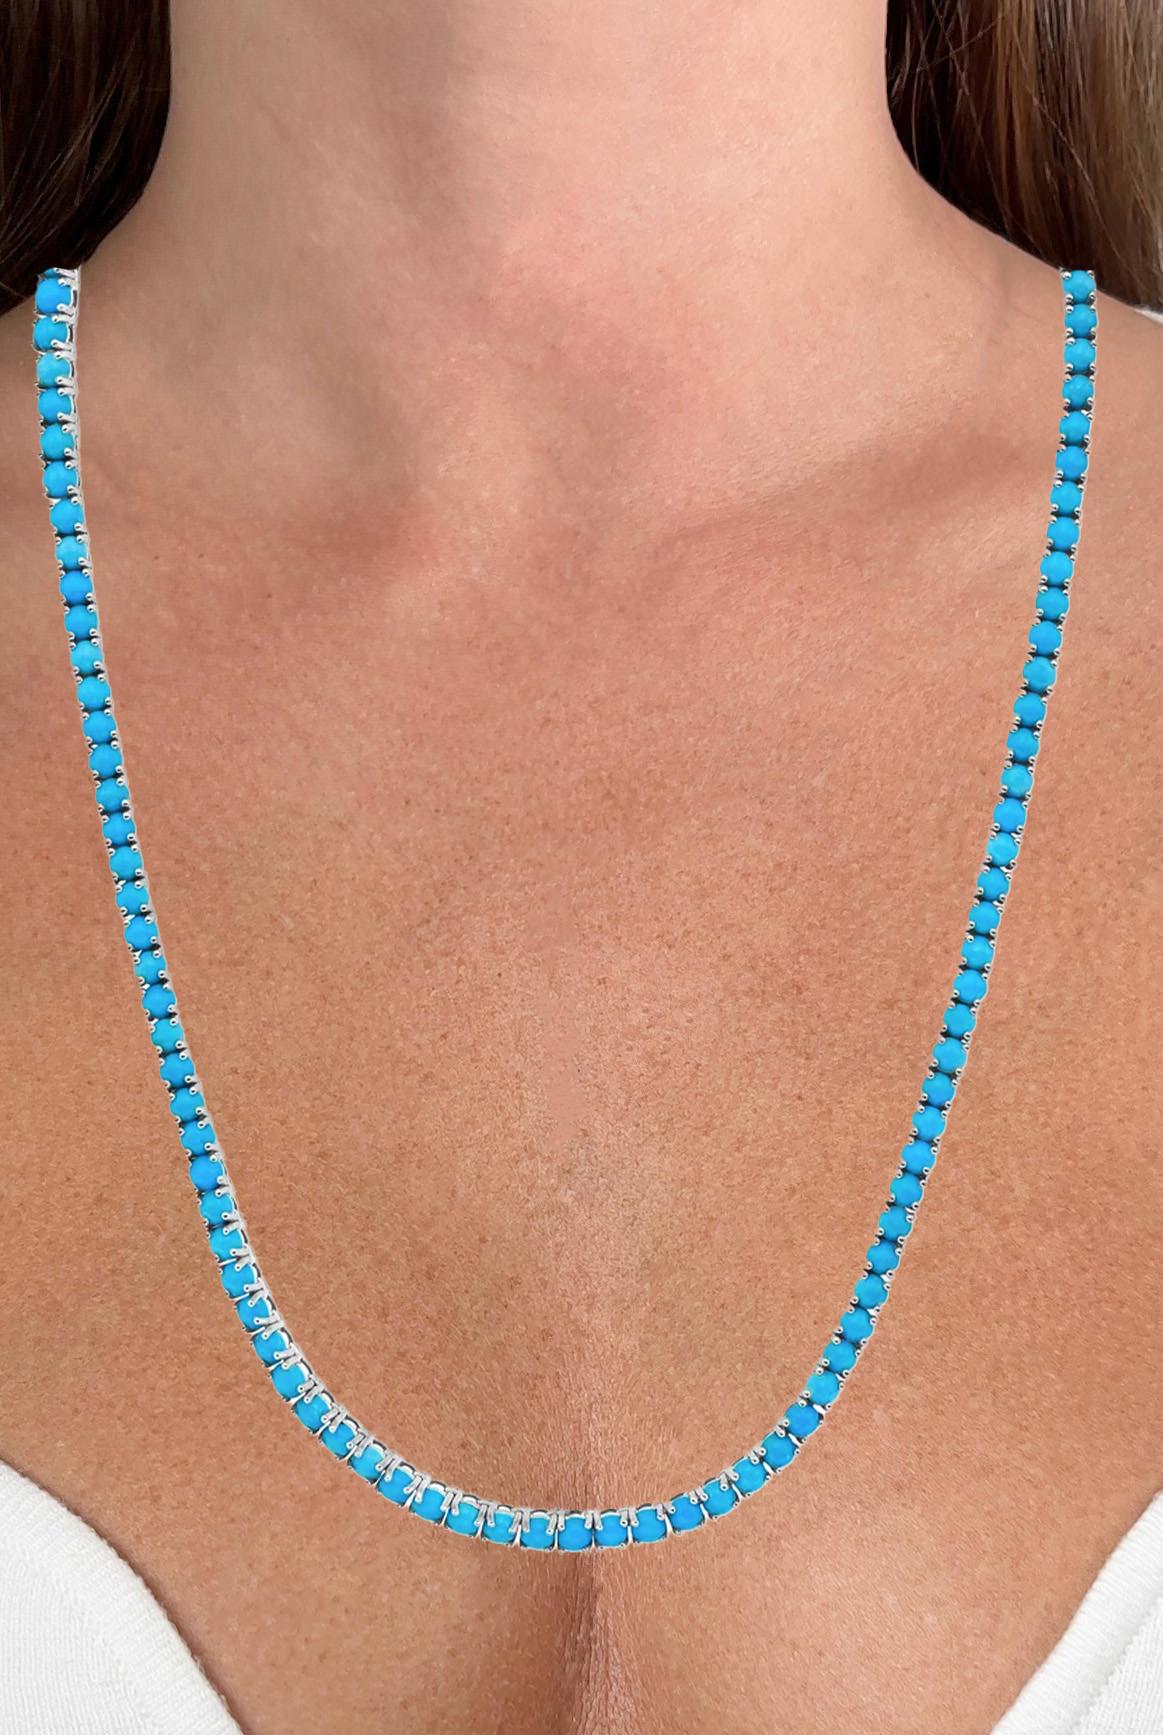 Contemporary Turquoise Necklace 16.64 Carats 14K White Gold For Sale